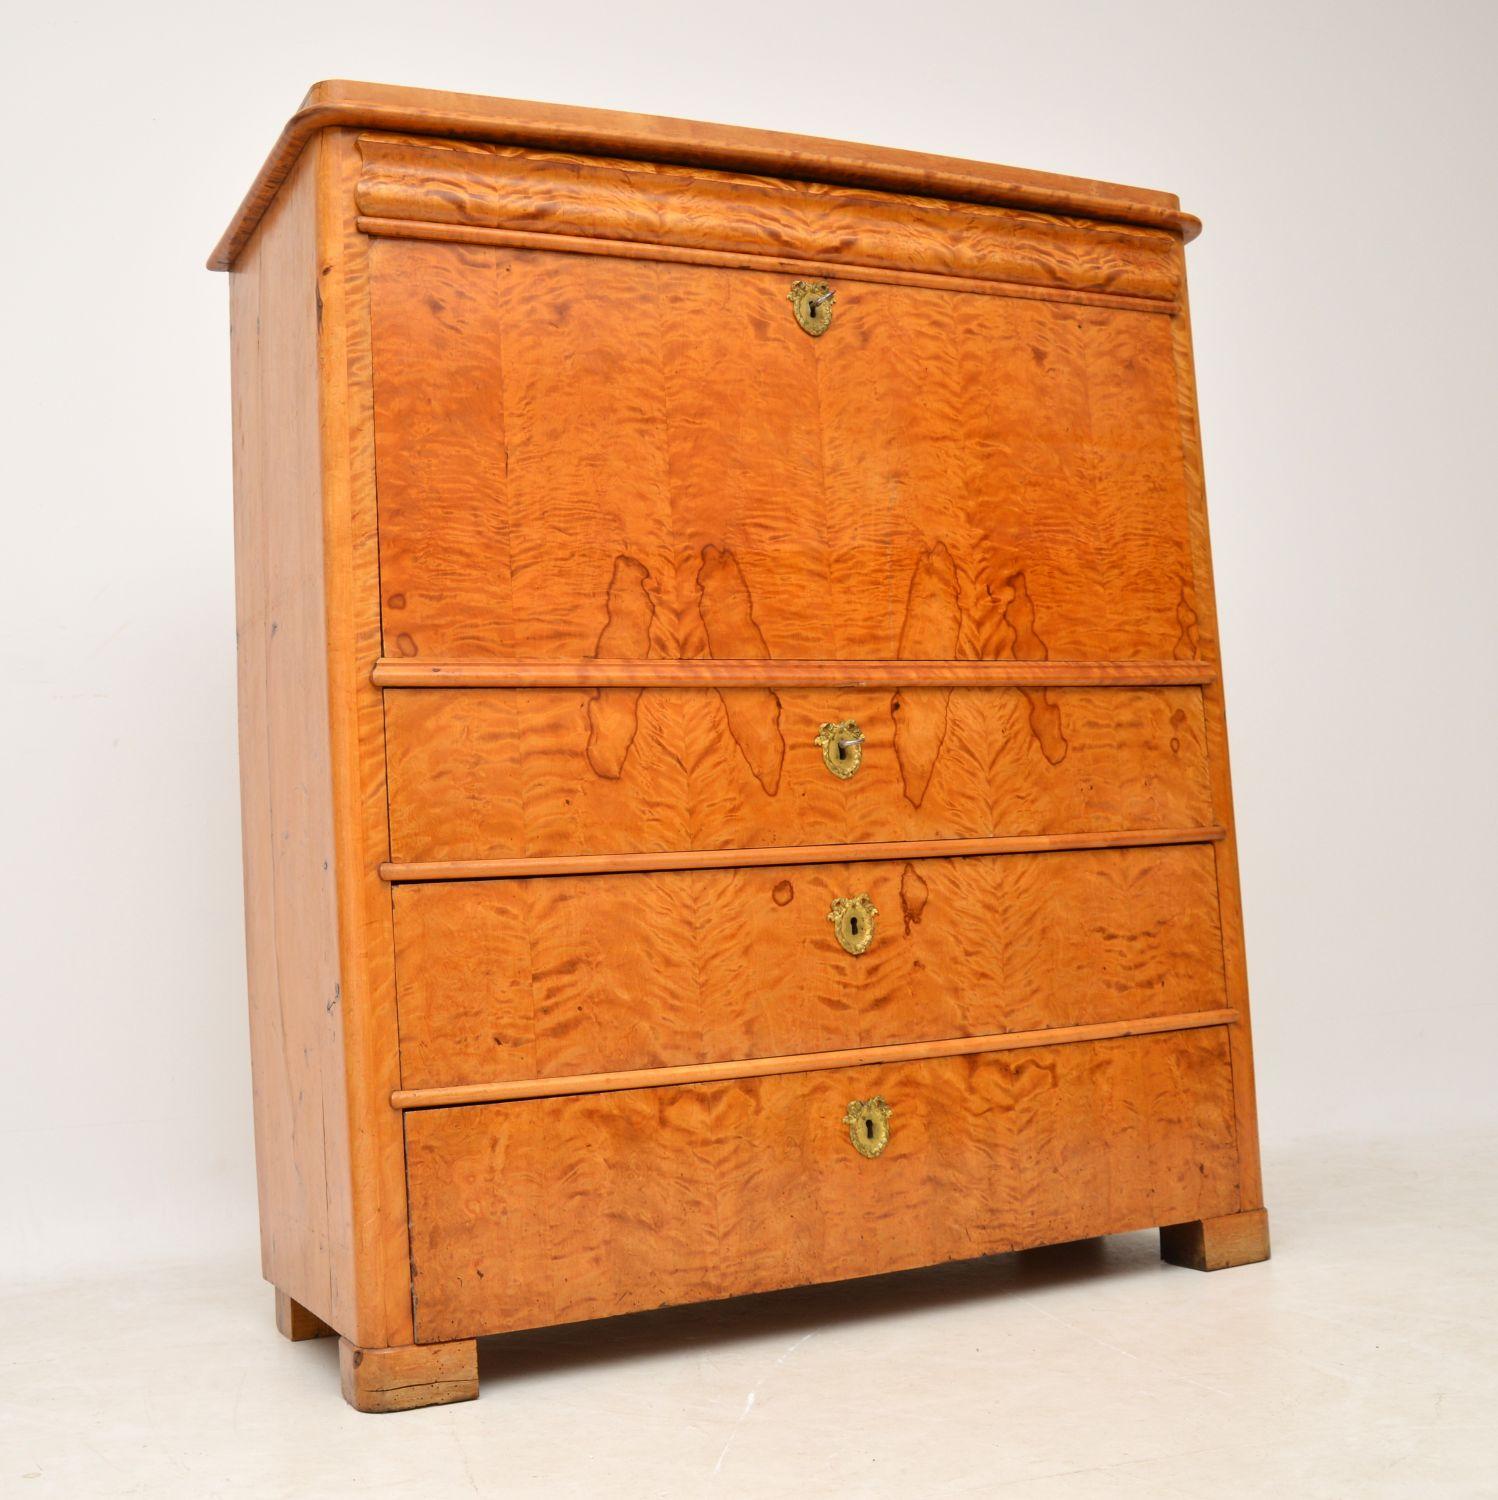 Antique Swedish Biedermeier satin birch secretaire with a stunning interior and full of character. I would date this piece to around the 1850s period and it’s in good original condition, with some of age related markings which we have shown in the